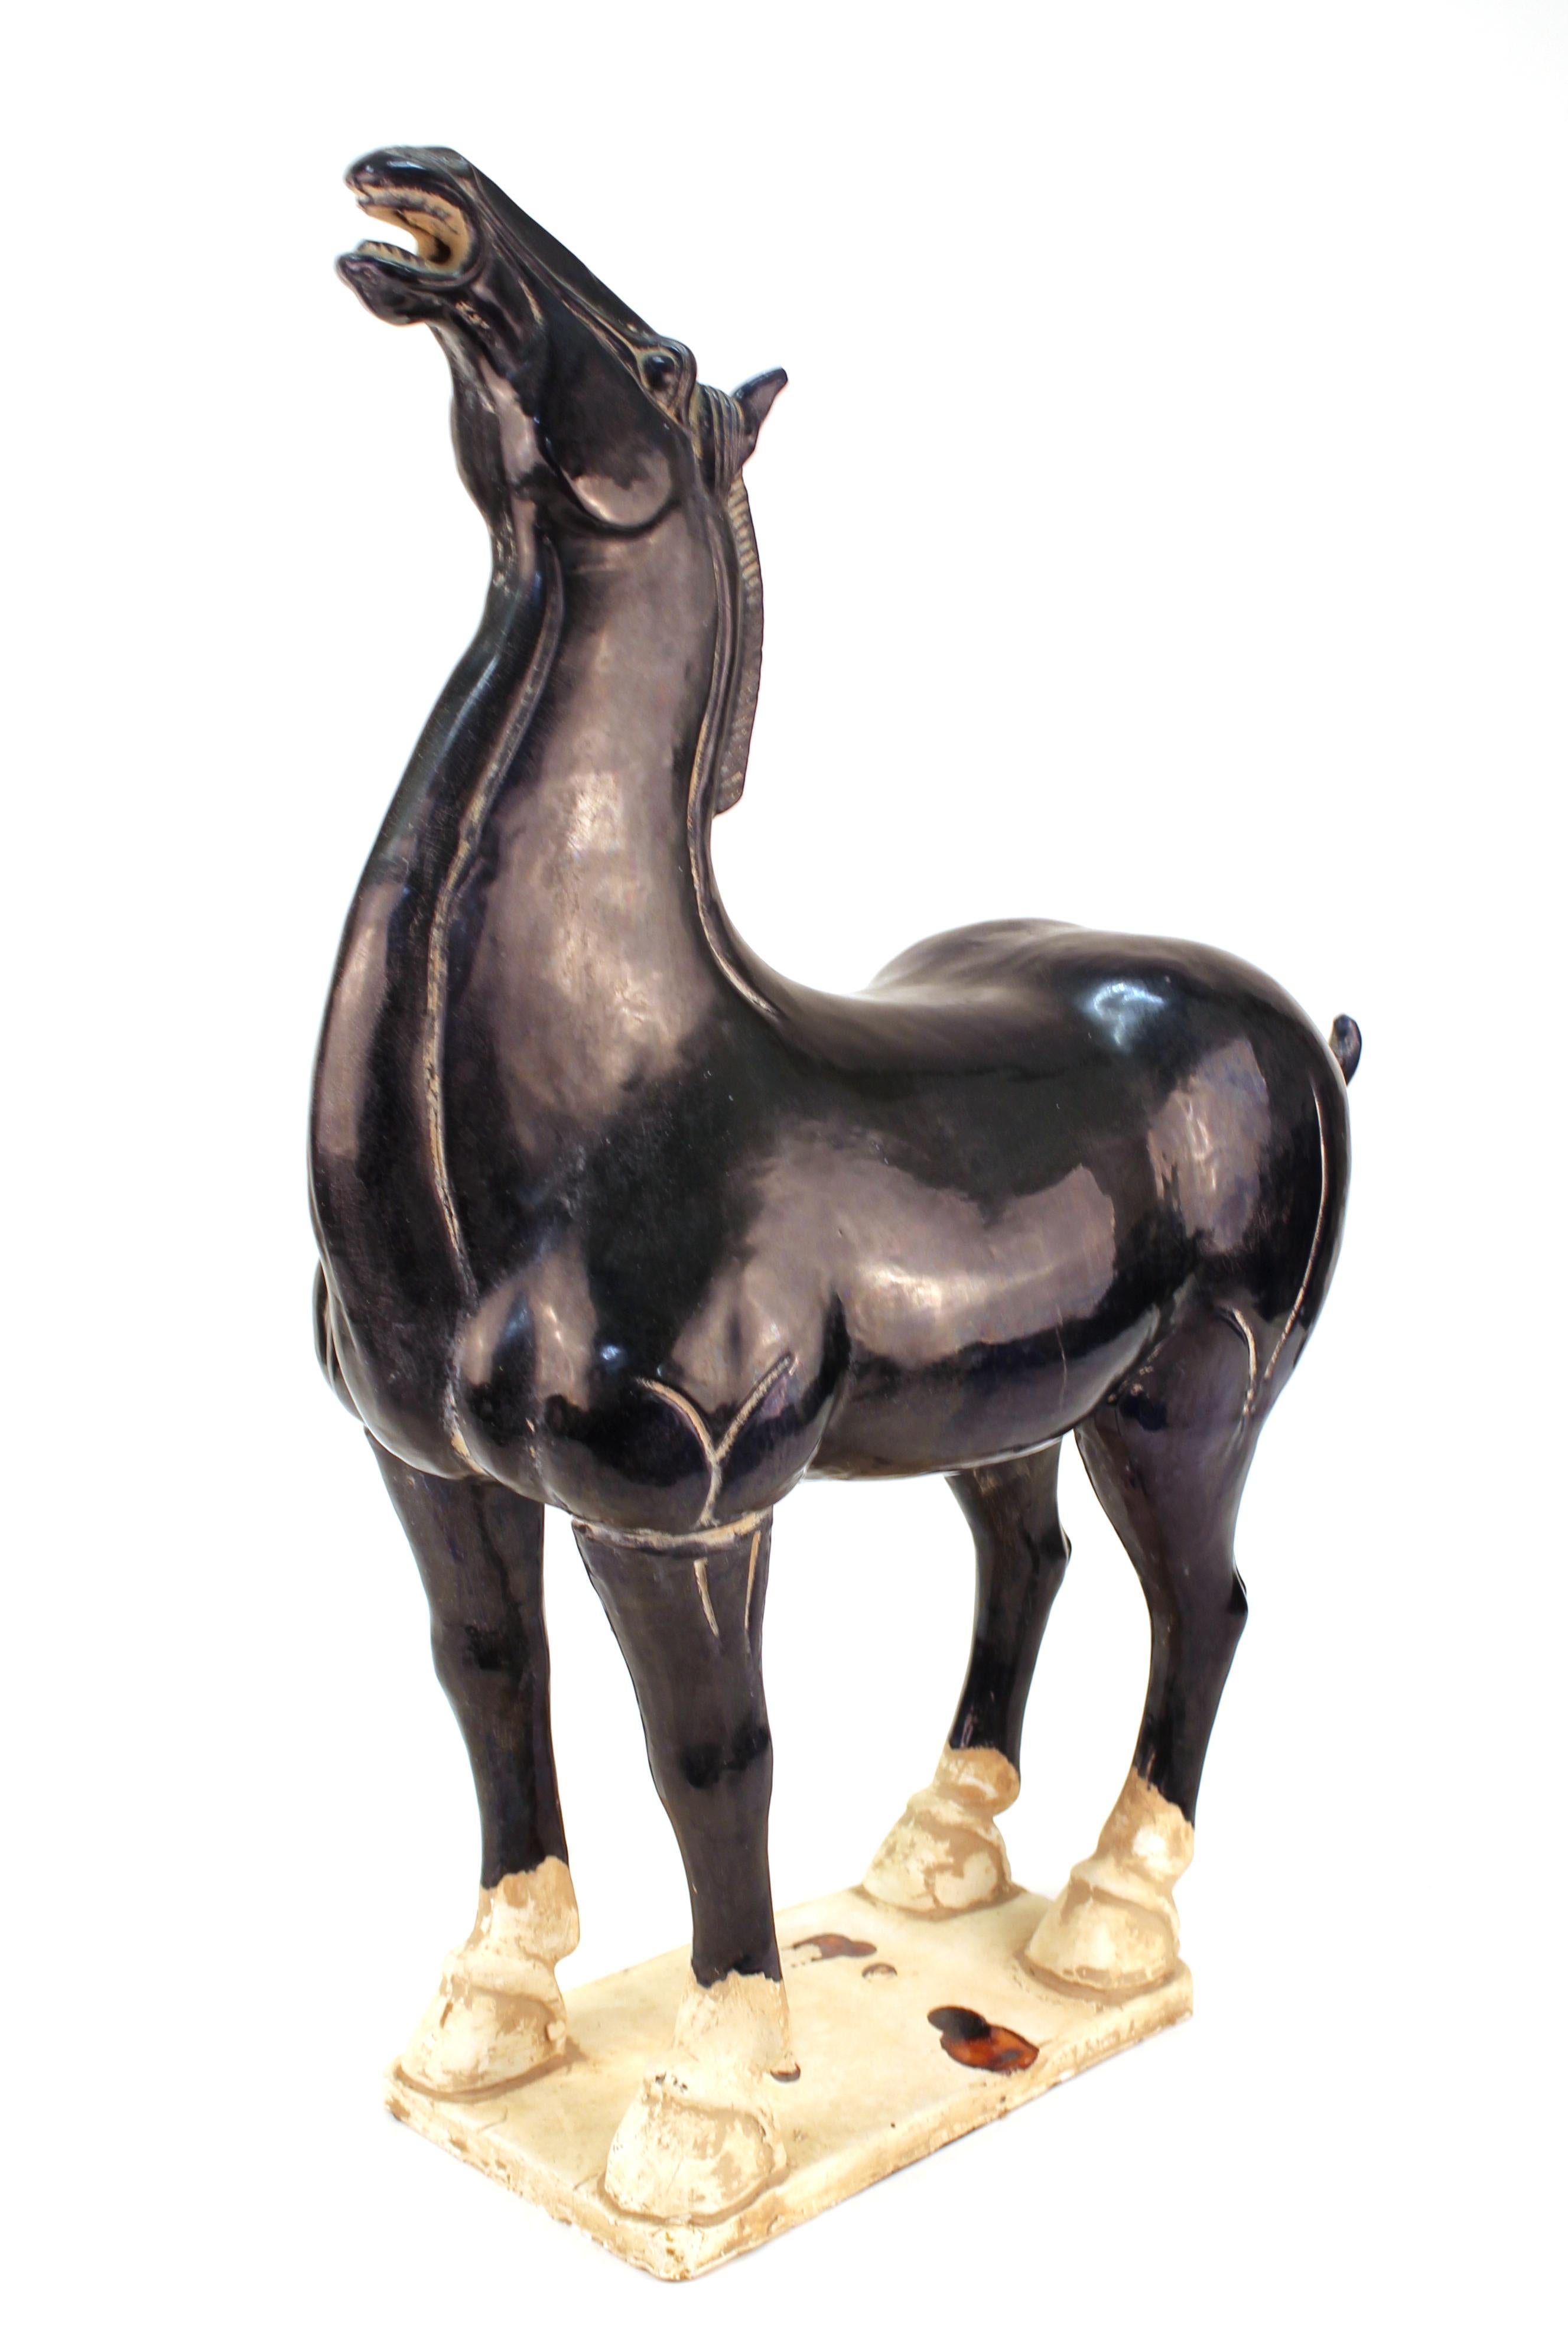 Chinese terracotta sculpture of a horse inspired by the Tang dynasty. The horse is glazed in a dark blue color and has drippings on its base. Part of drippings disappeared from the base. The piece is in overall great vintage condition.